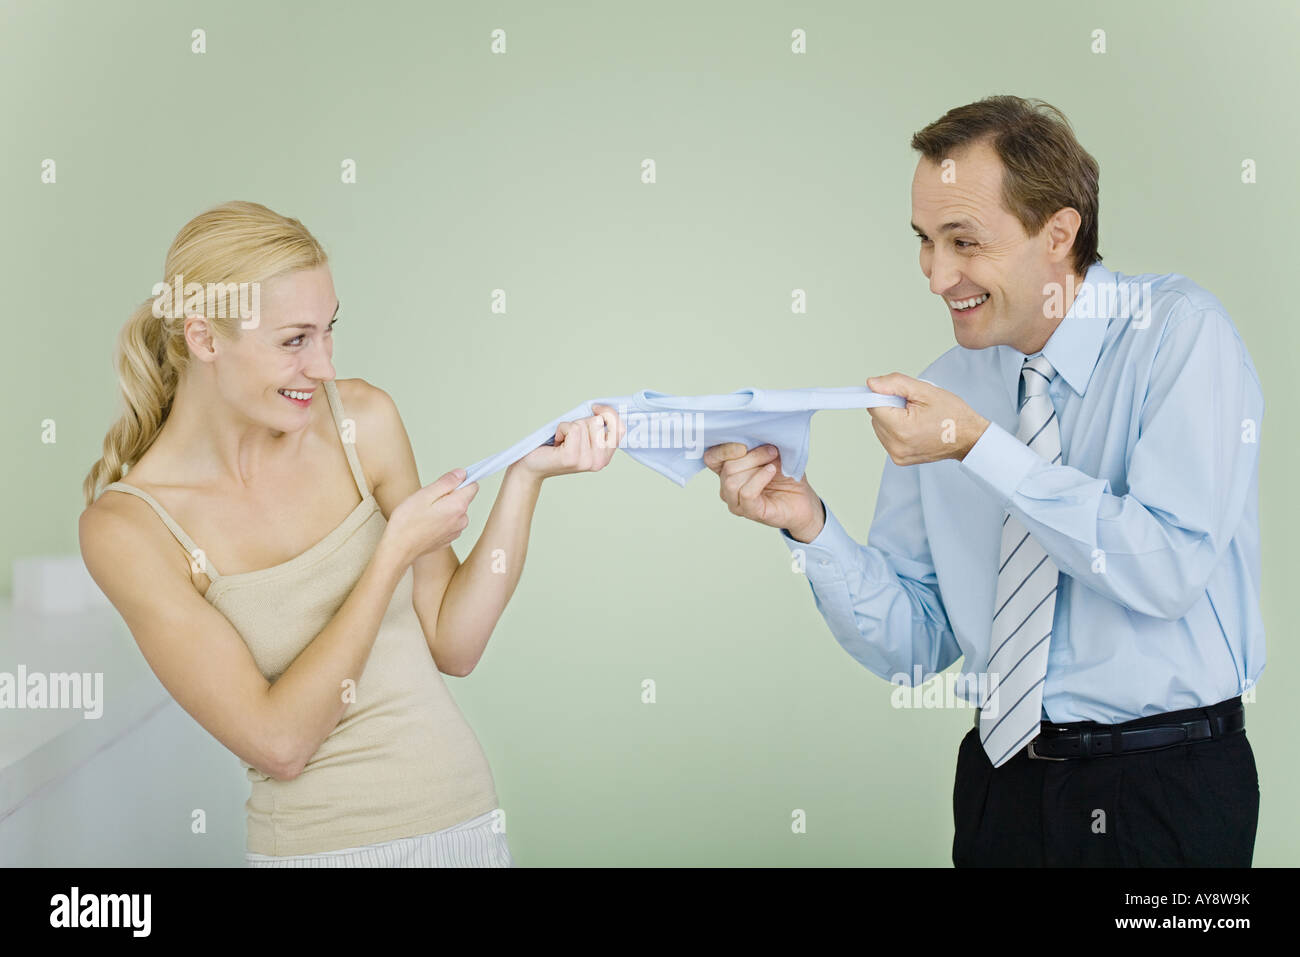 Couple fighting over baby clothing, smiling at each other Banque D'Images